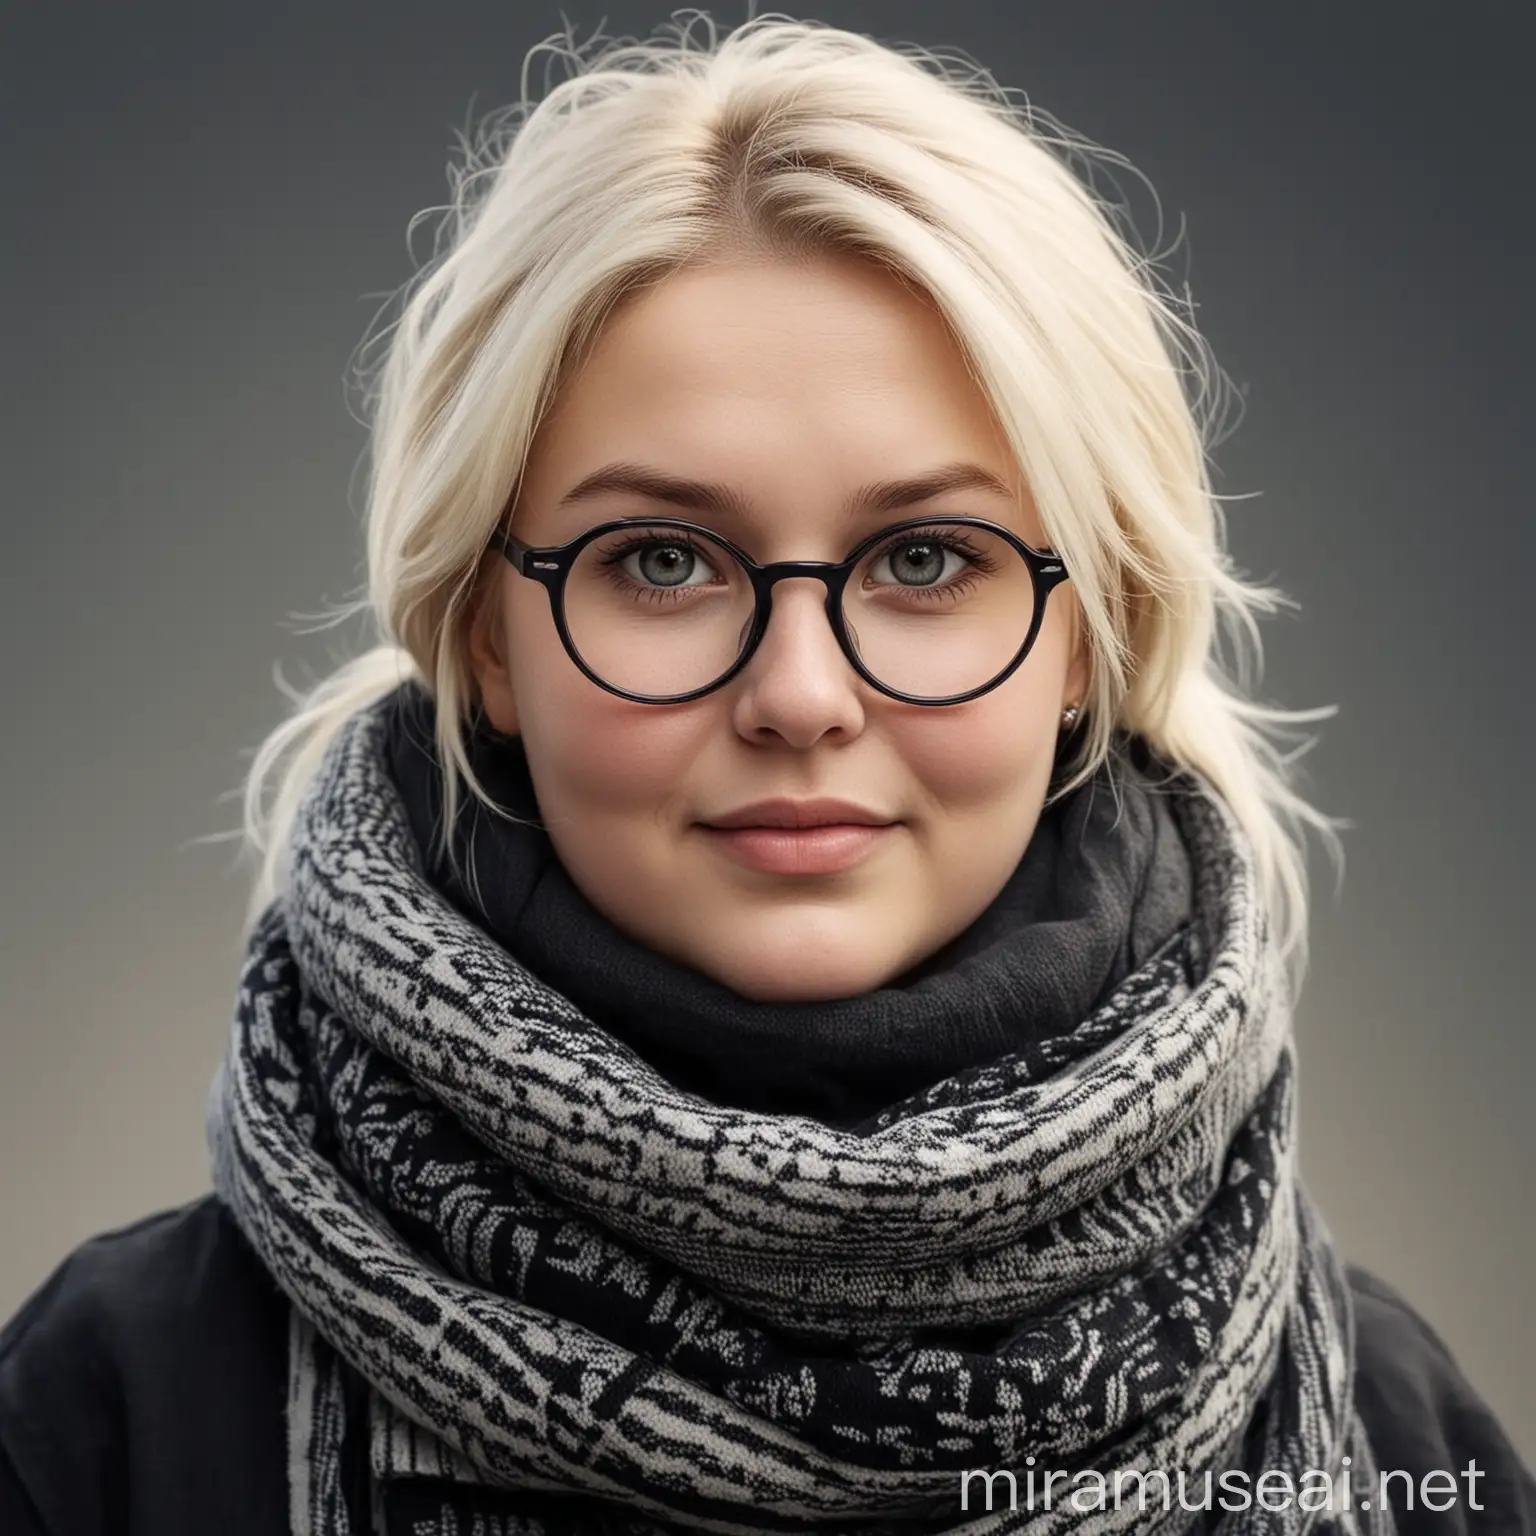 White Scandinavian woman. Very round and chubby face. She is wearing black glasses and a large scarf around her neck.